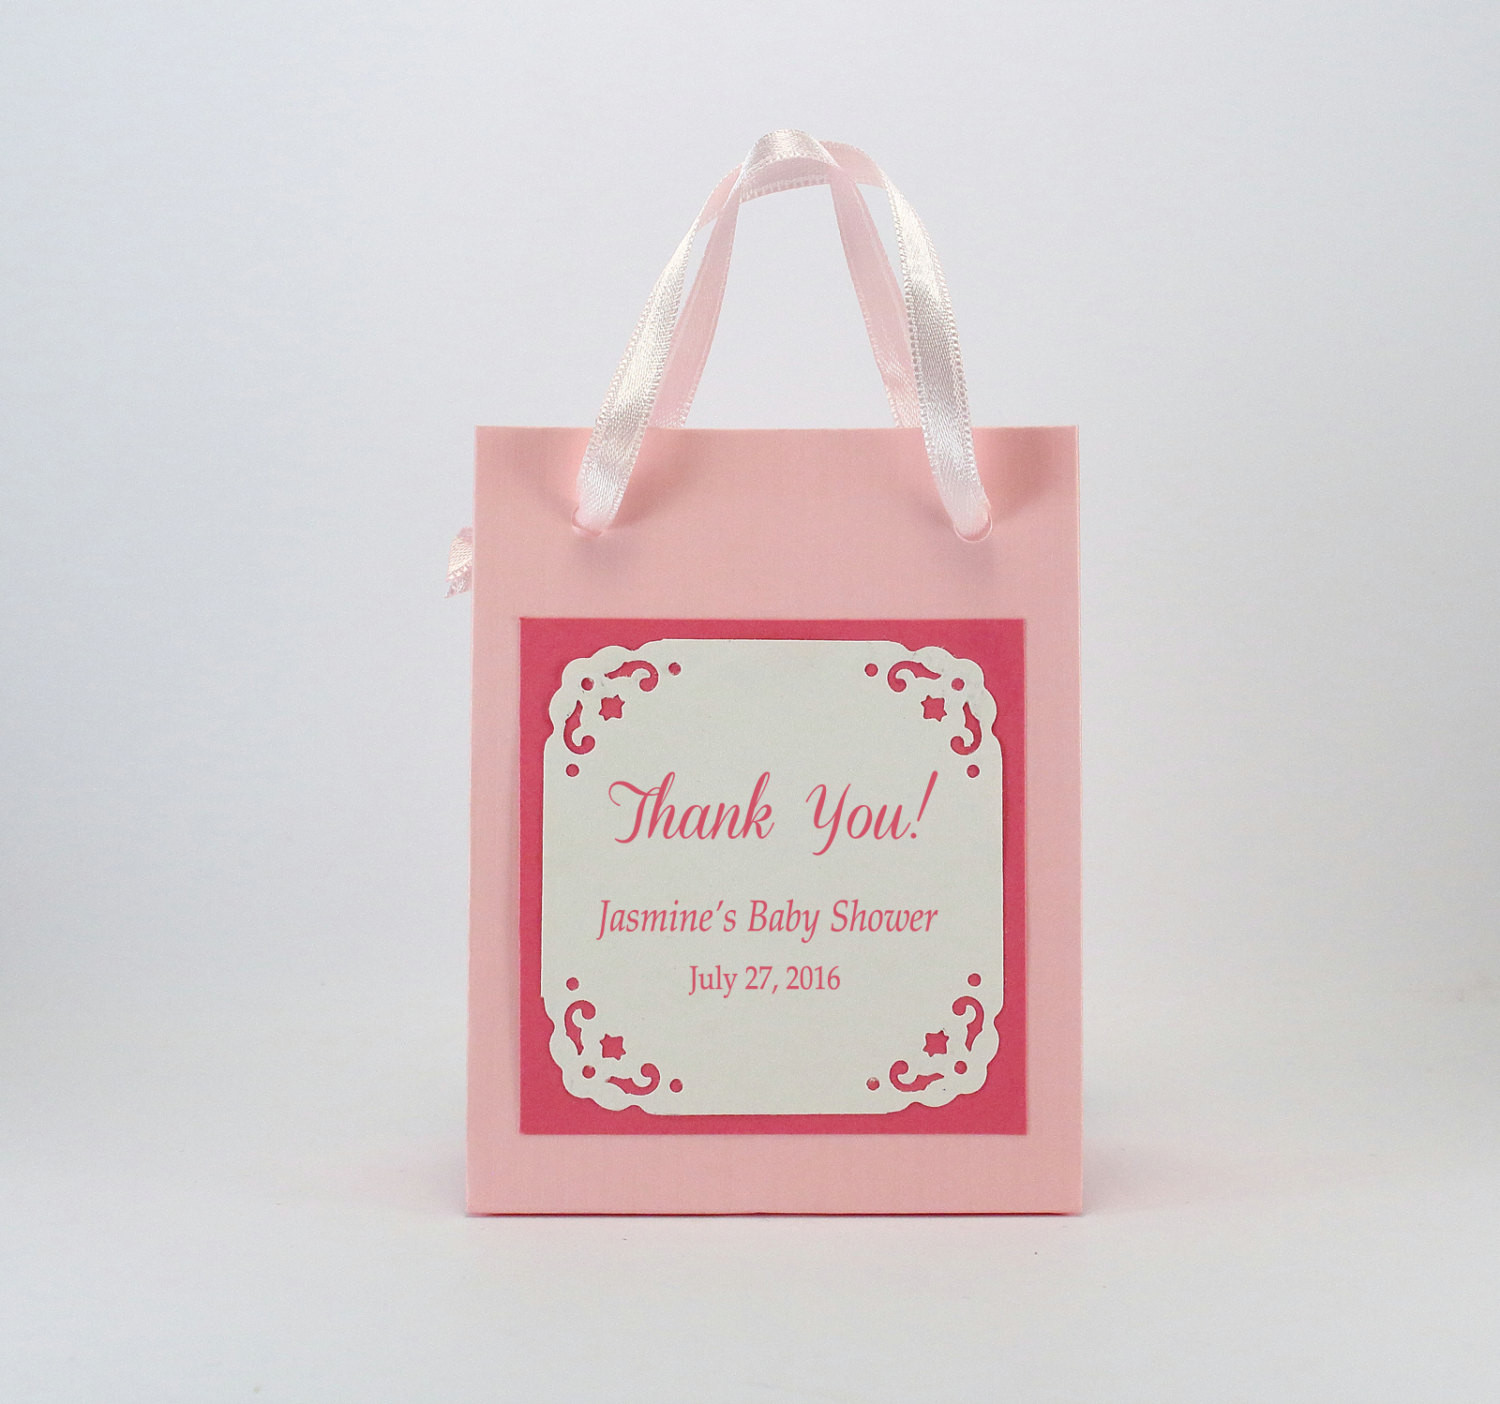 Personalized Baby Shower Gift Bags
 10 Baby Shower Favor Bags with a printed label Personalized